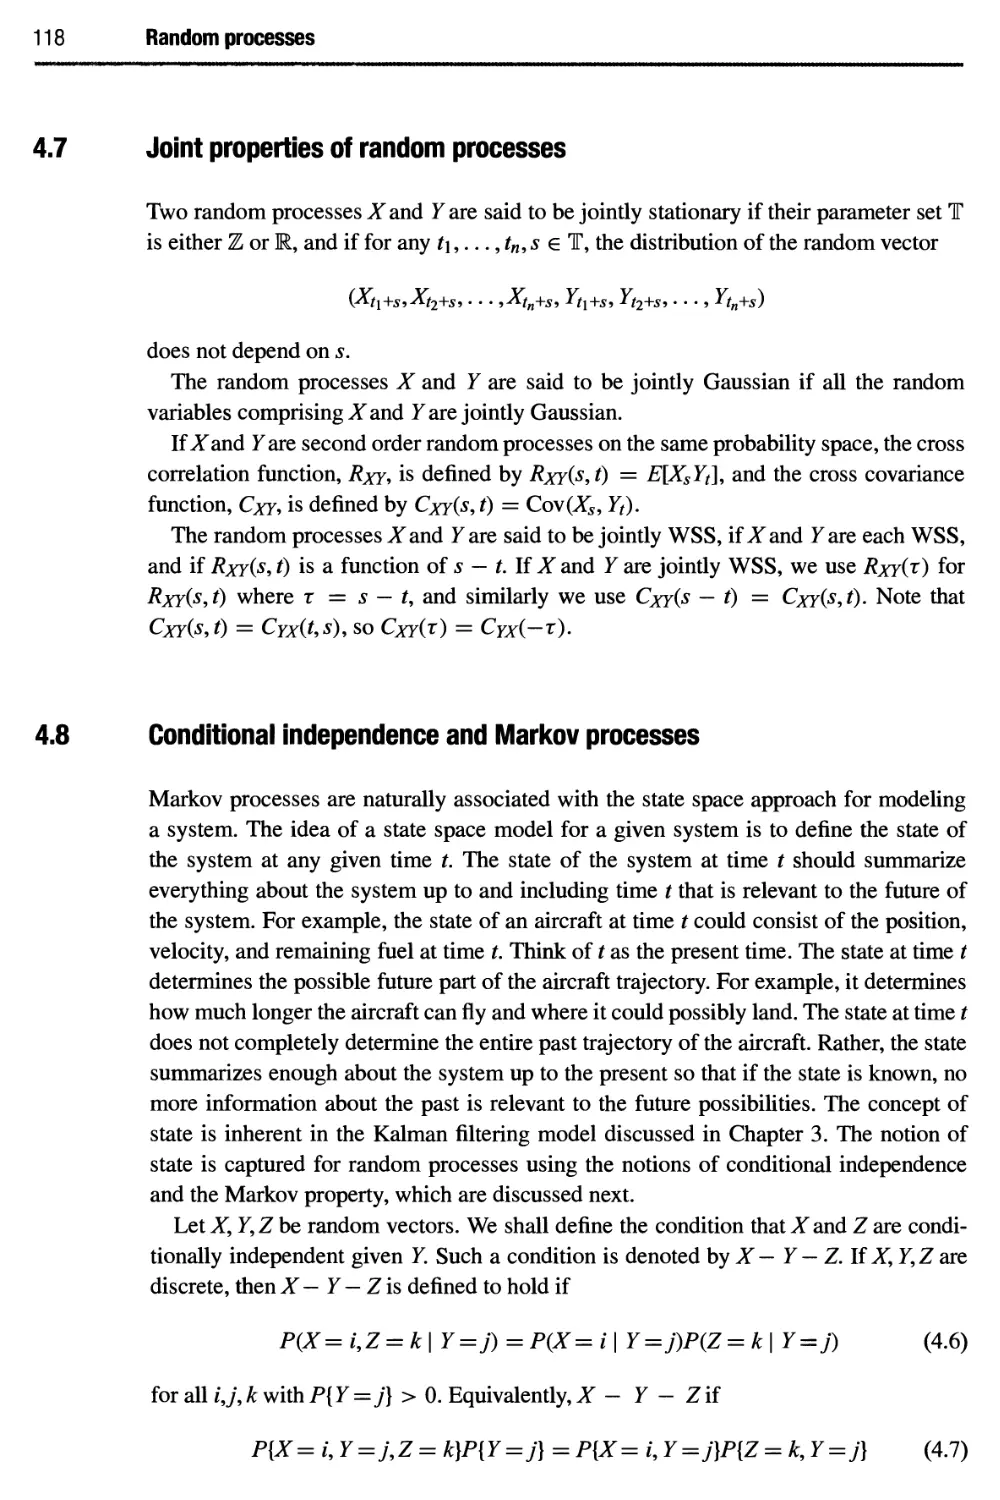 4.7 Joint properties of random processes 118
4.8 Conditional independence and Markov processes 118